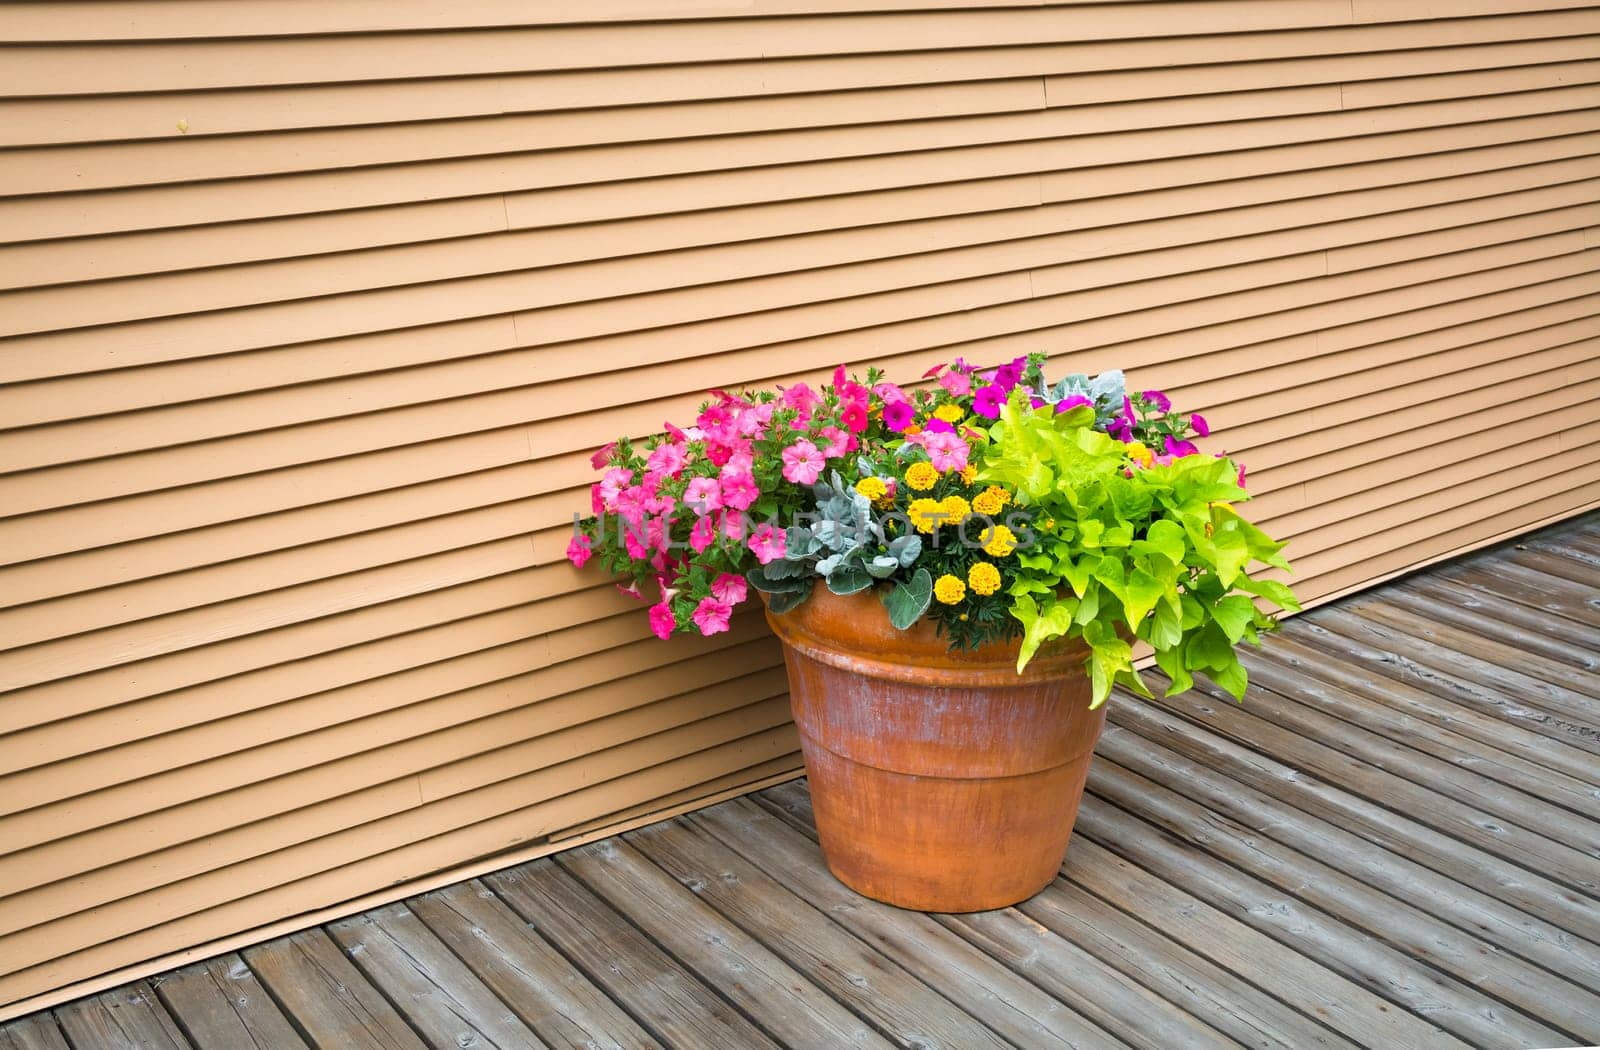 Colorful flowers in big earthenware jar on wooden siding background. Decorative flowers on wooden pavement of the street